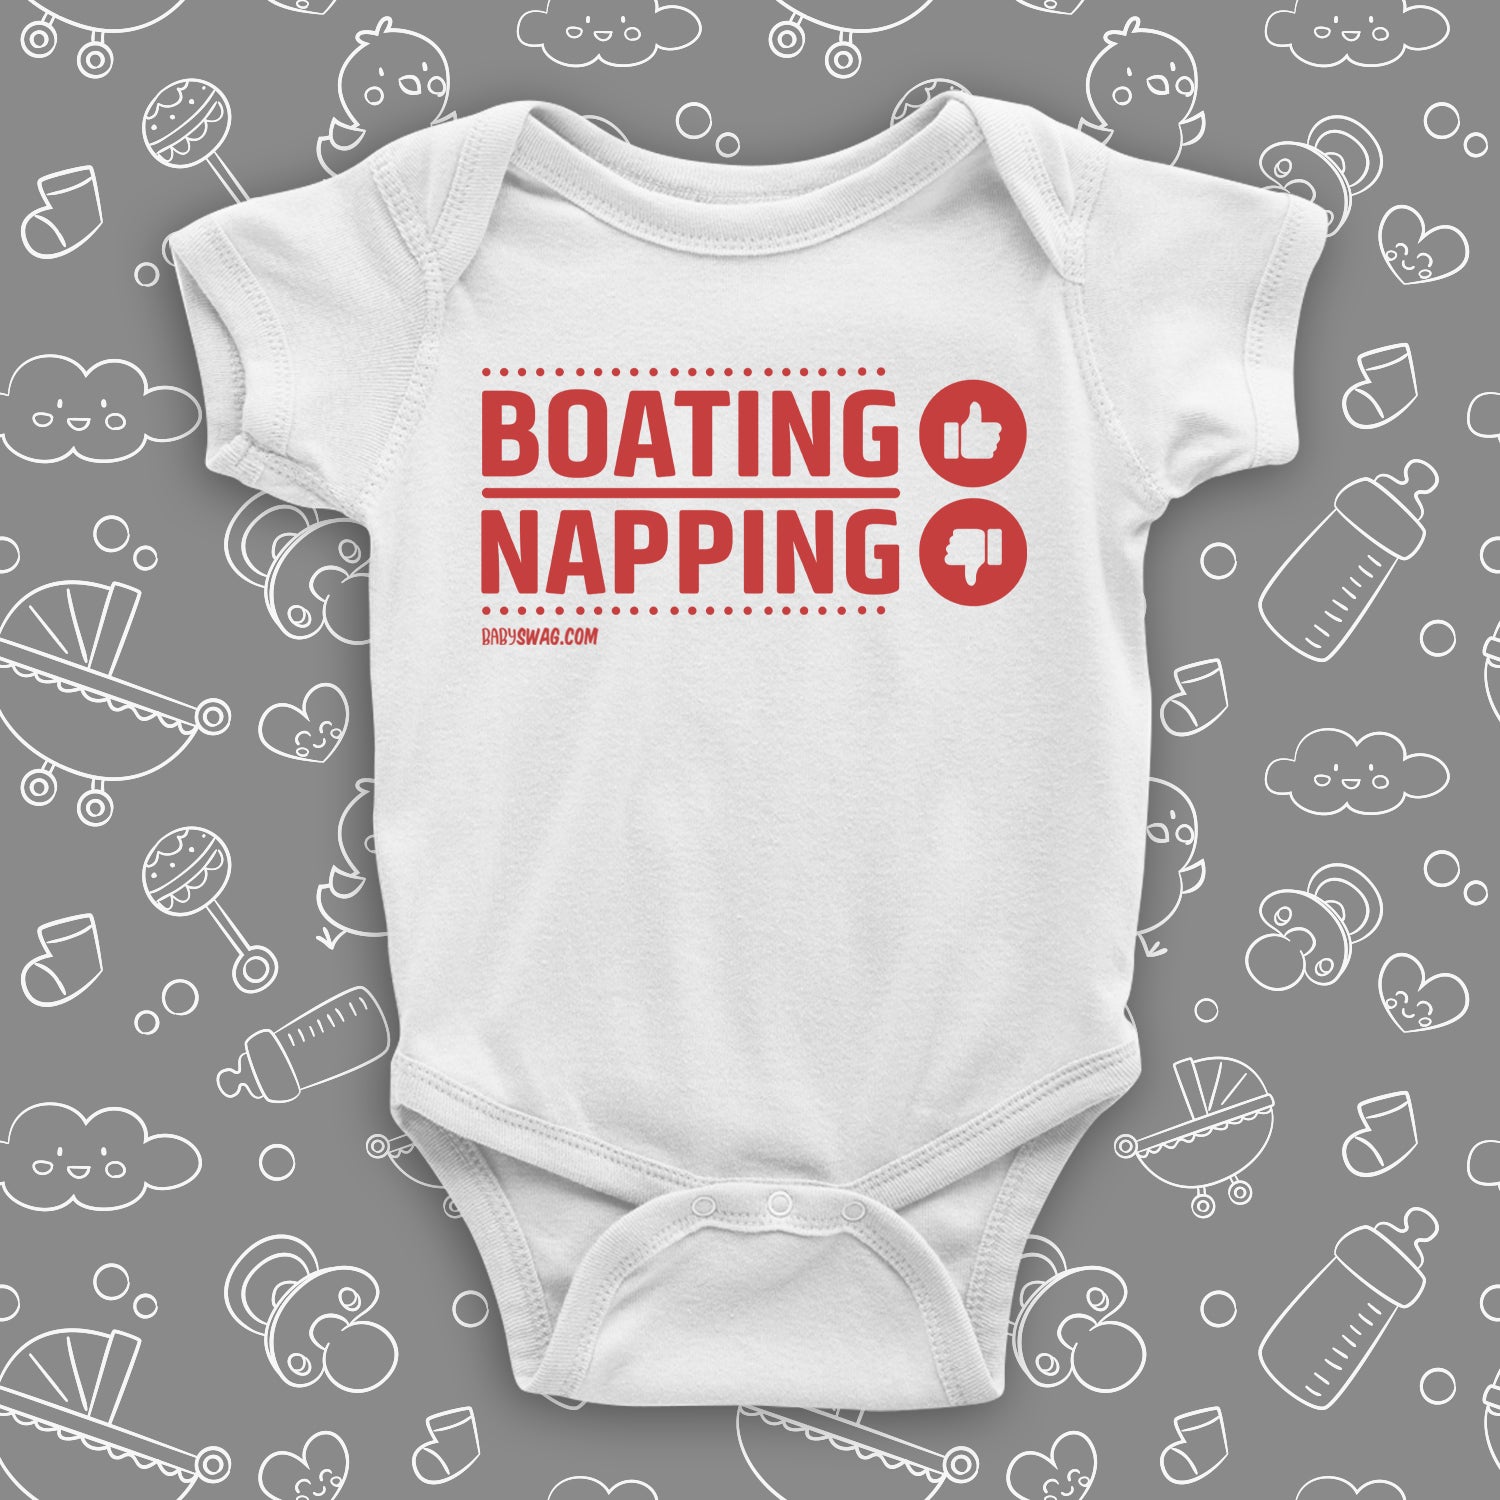  Cool baby onesies with saying "Boating, Napping" in white.